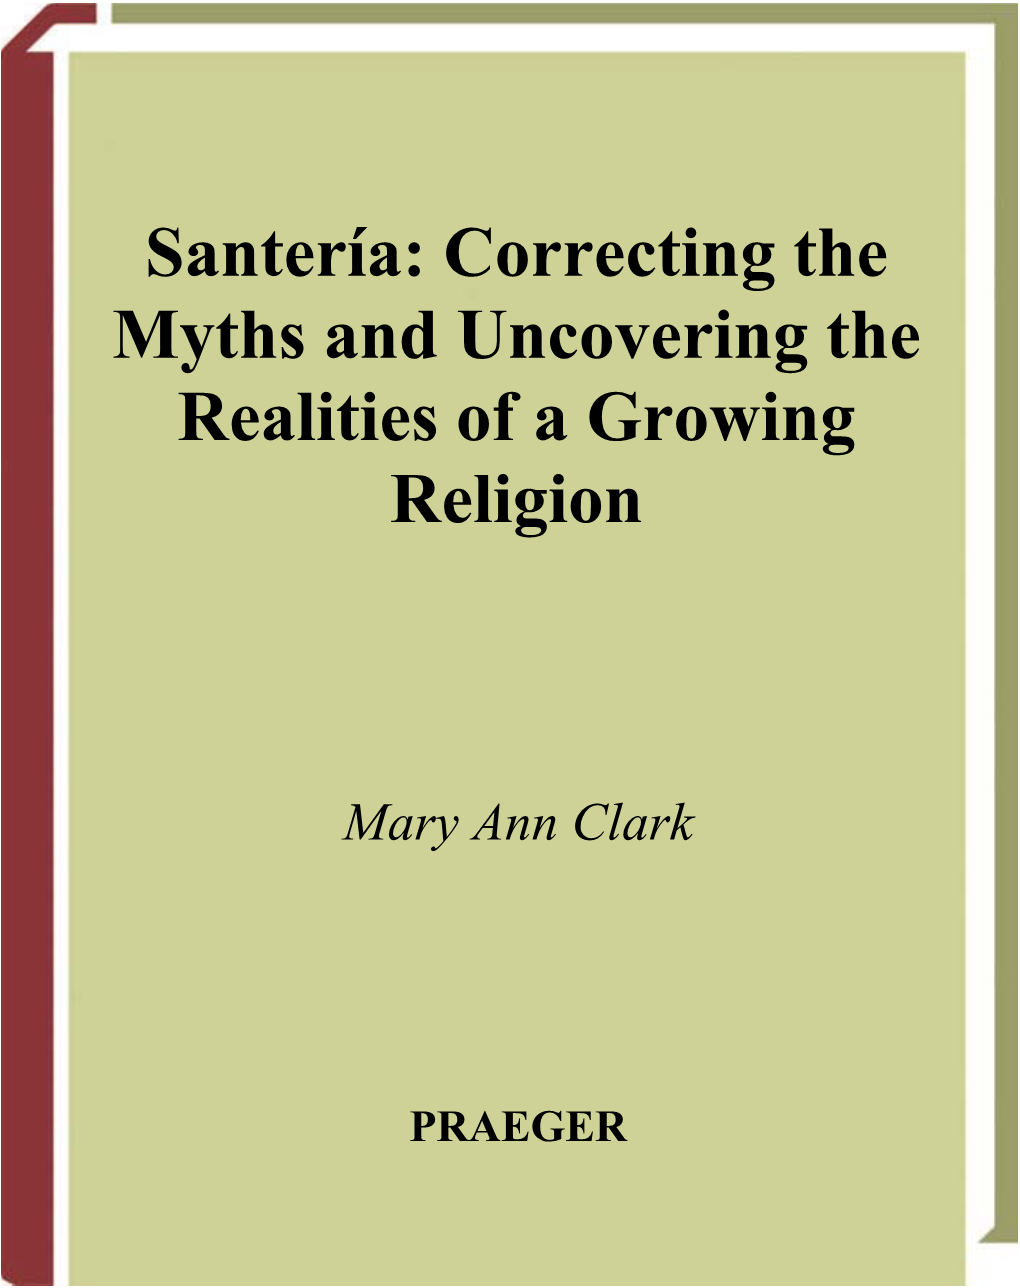 Santería: Correcting the Myths and Uncovering the Realities of a Growing Religion